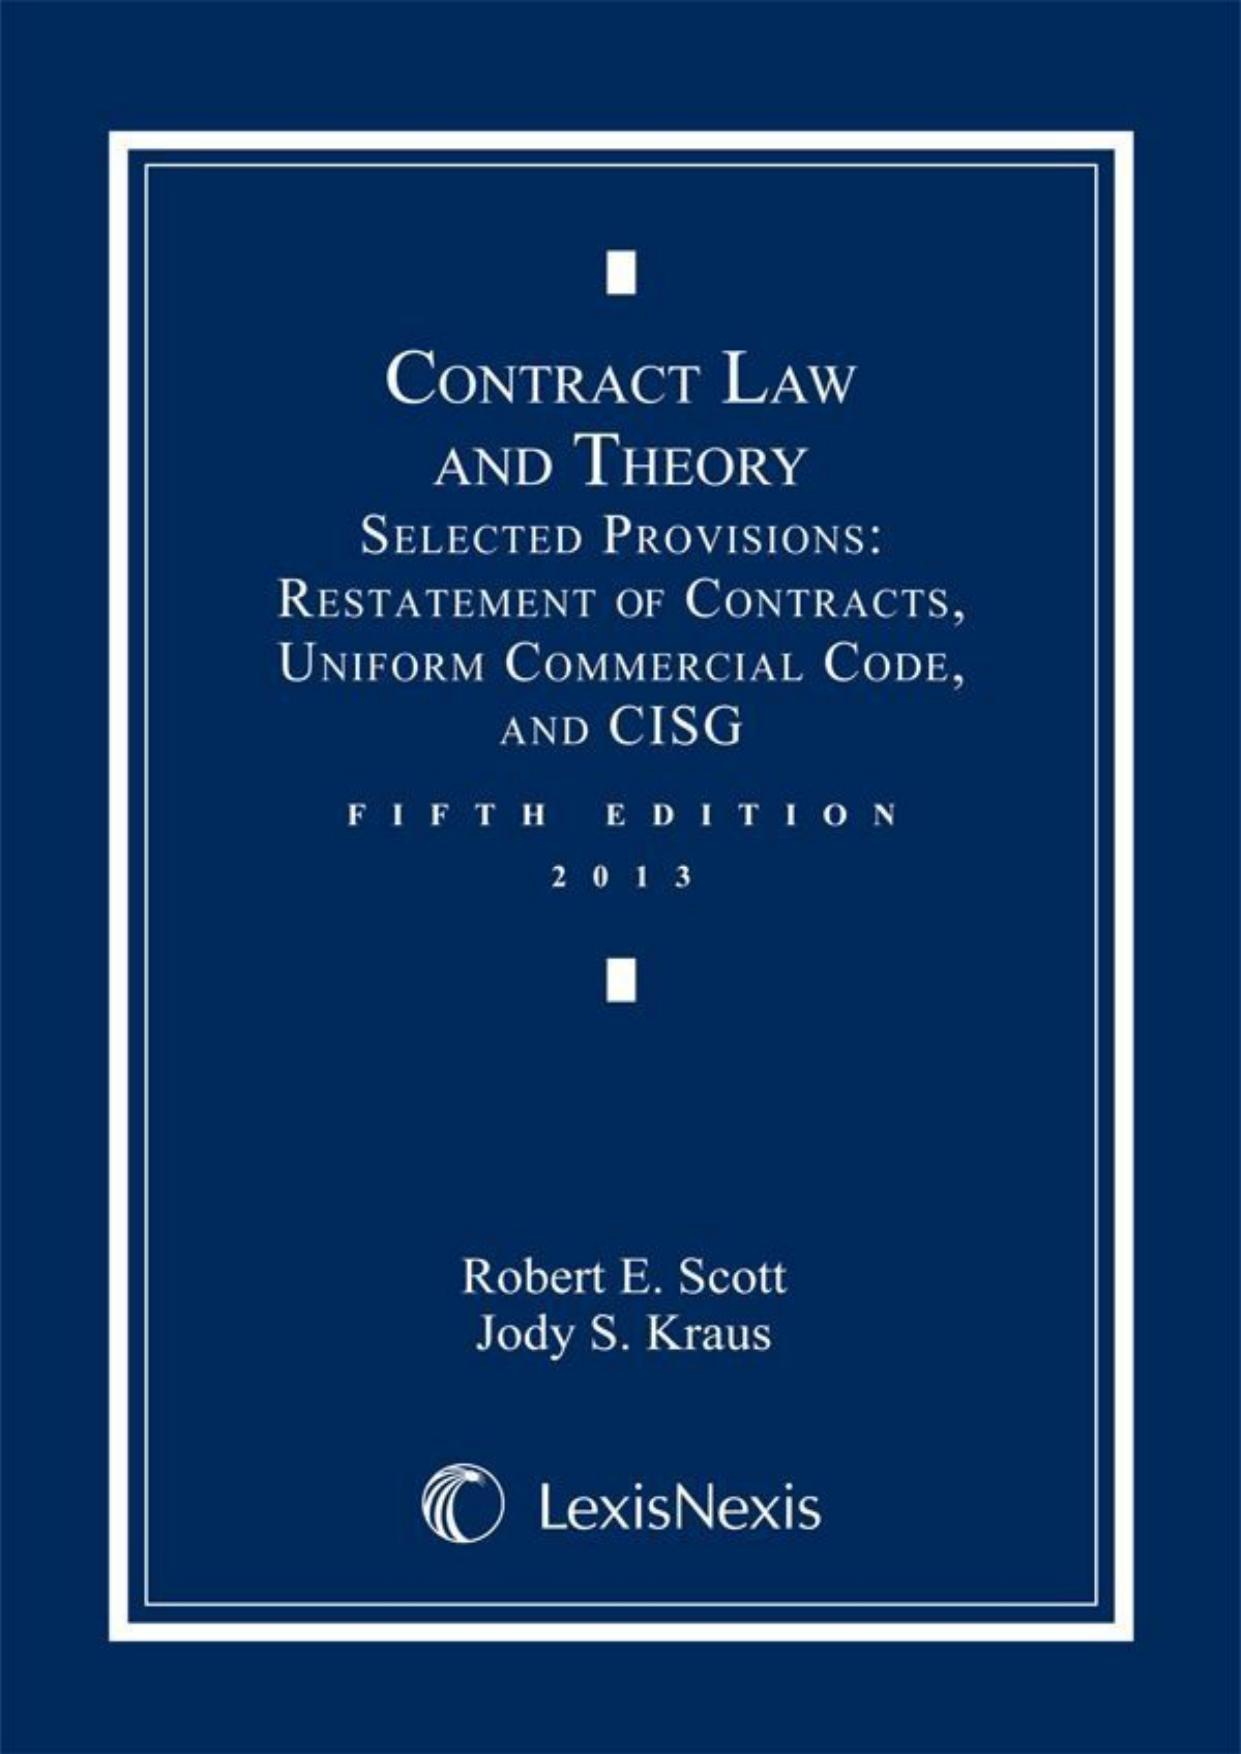 Contract Law and Theory Selected Provisions Restatement of ContCommercial Code, 2013 Edition - Robert E. Scott & Jody S. Kraus.jpg